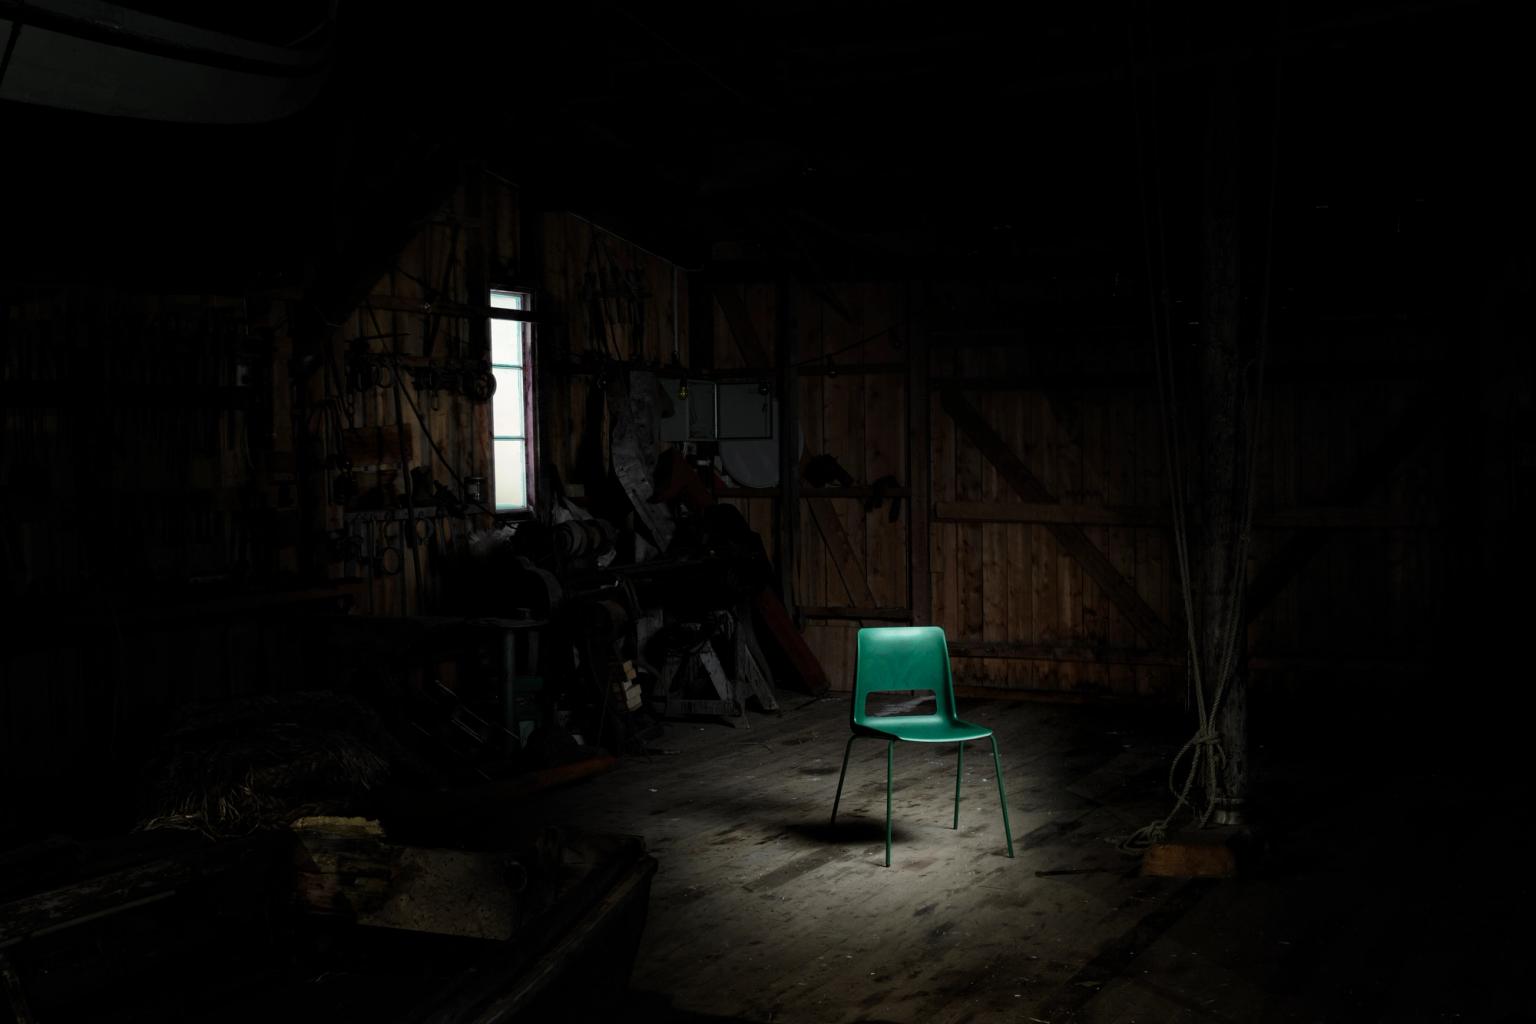 Green plastic chair with metal legs against a dark background